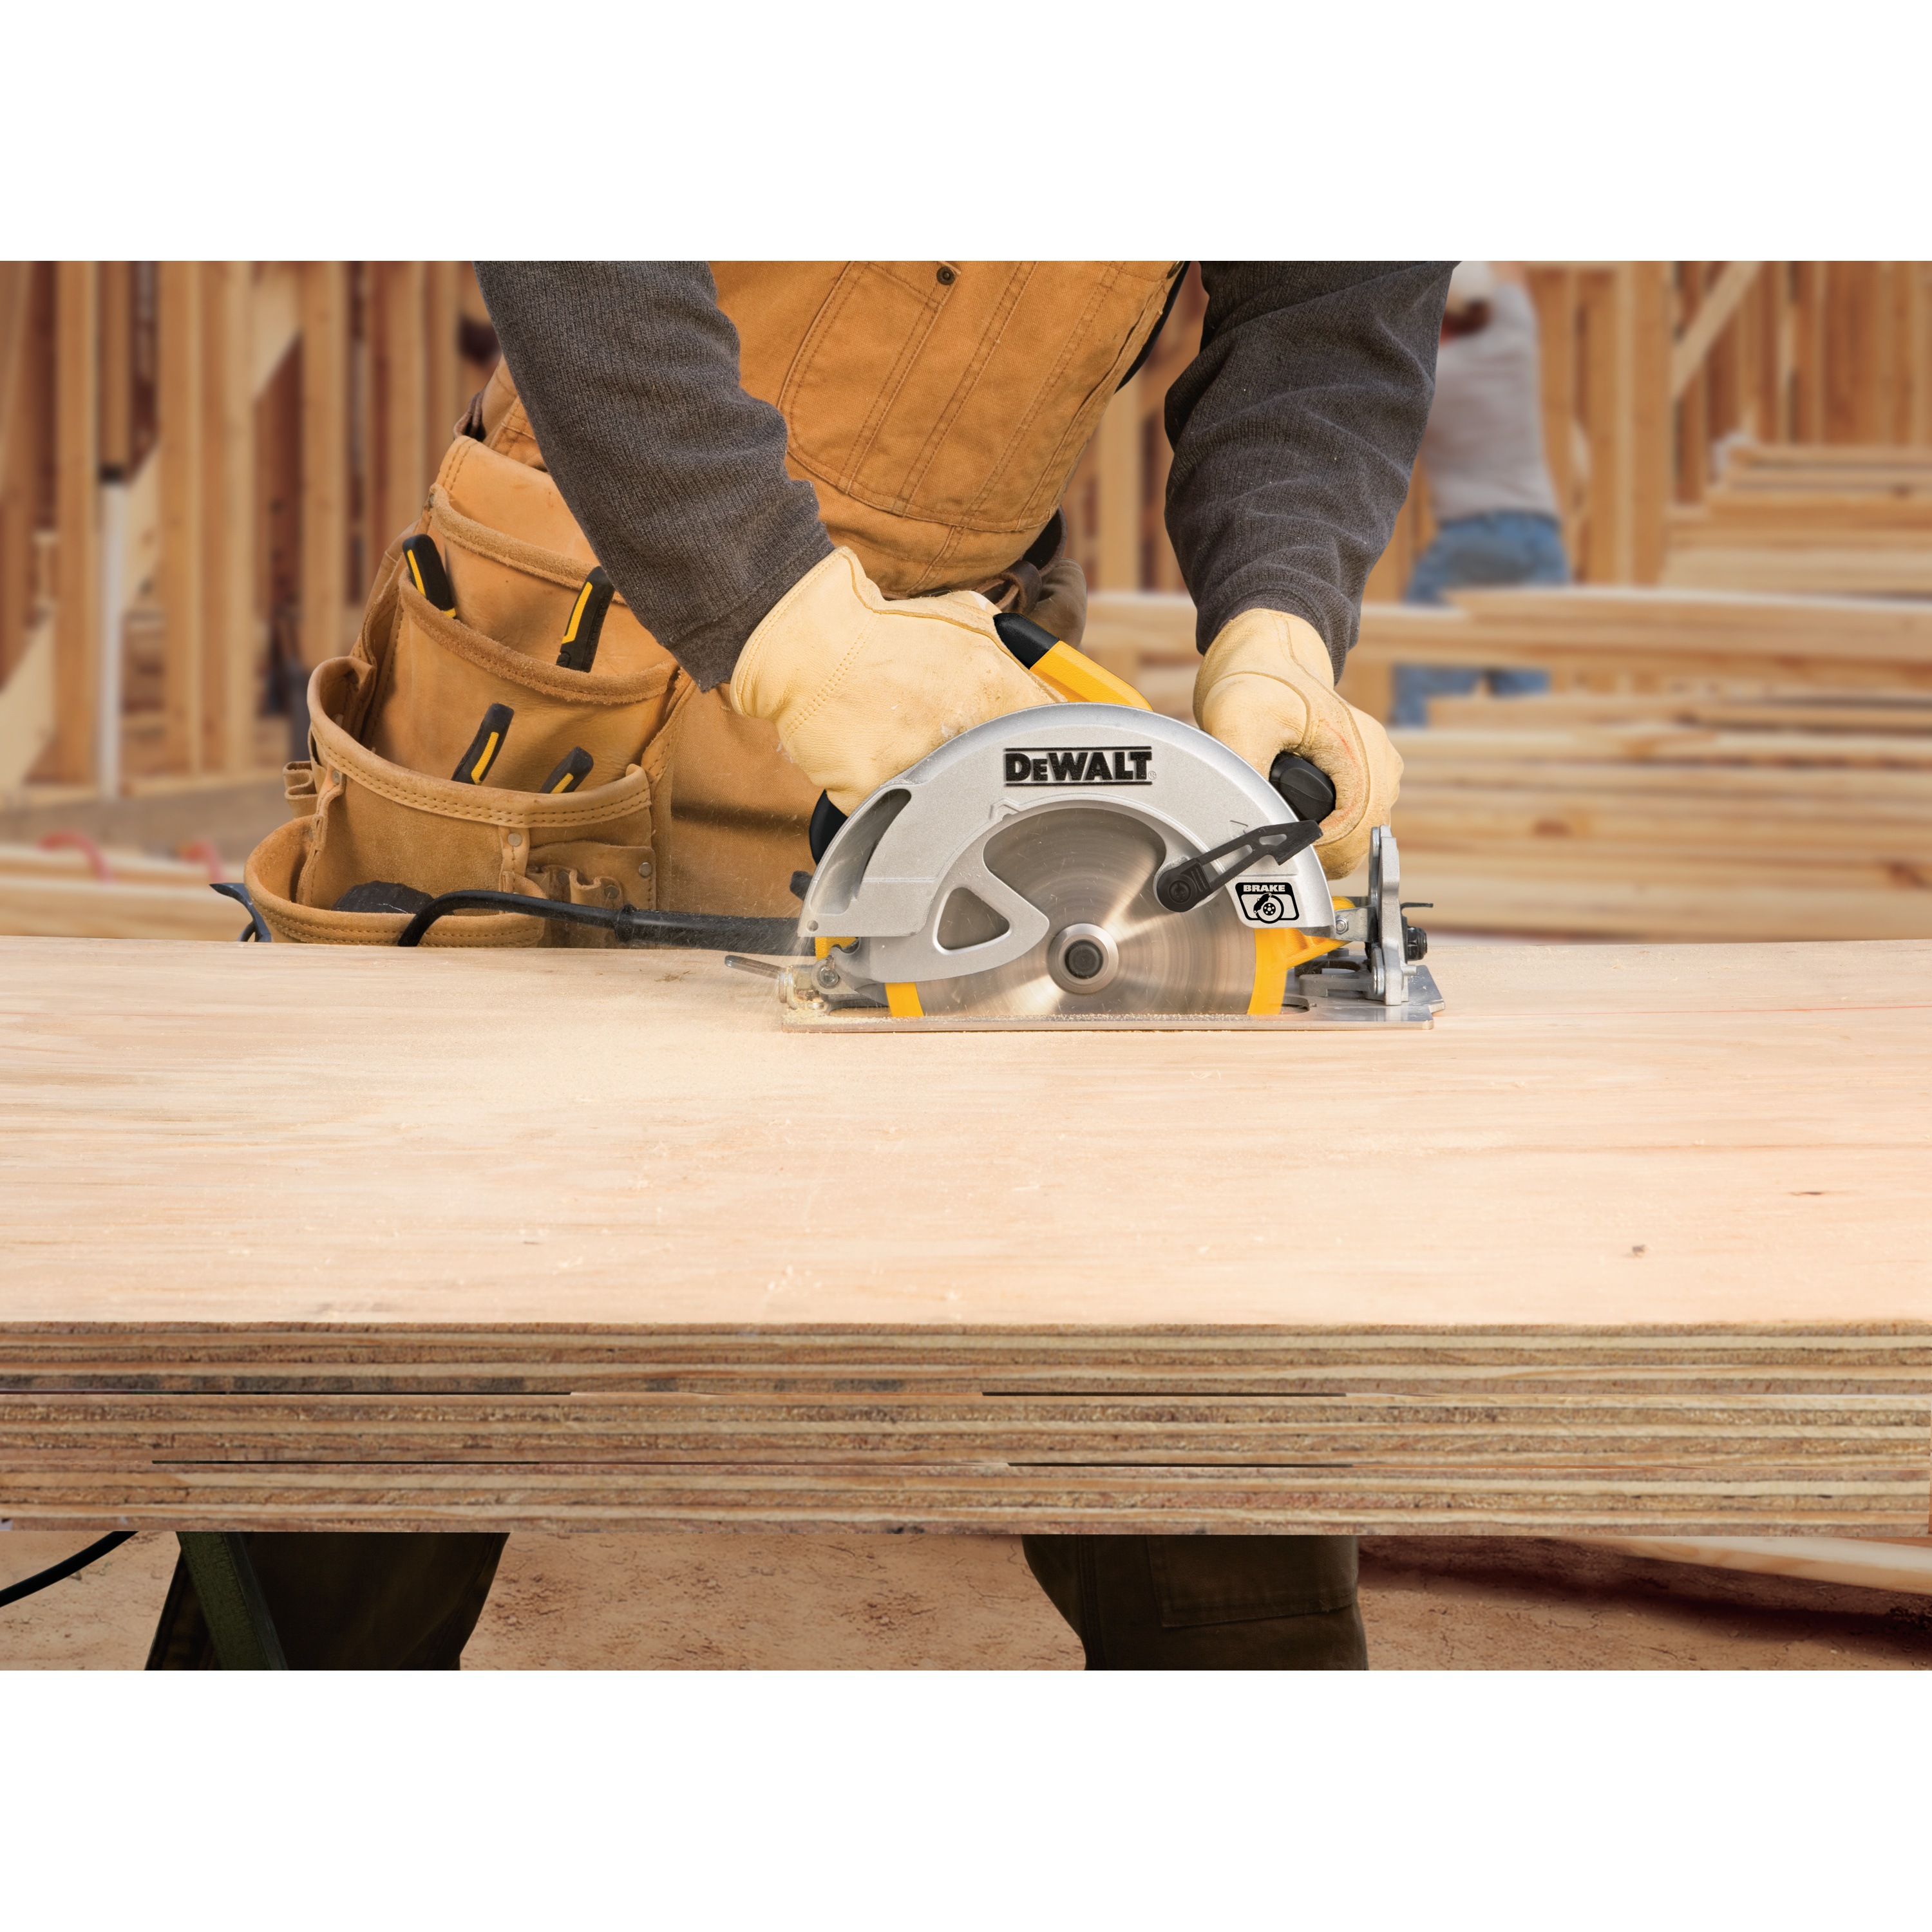 7 and one quarter inch lightweight circular saw sawing through multiple sheets of wood.